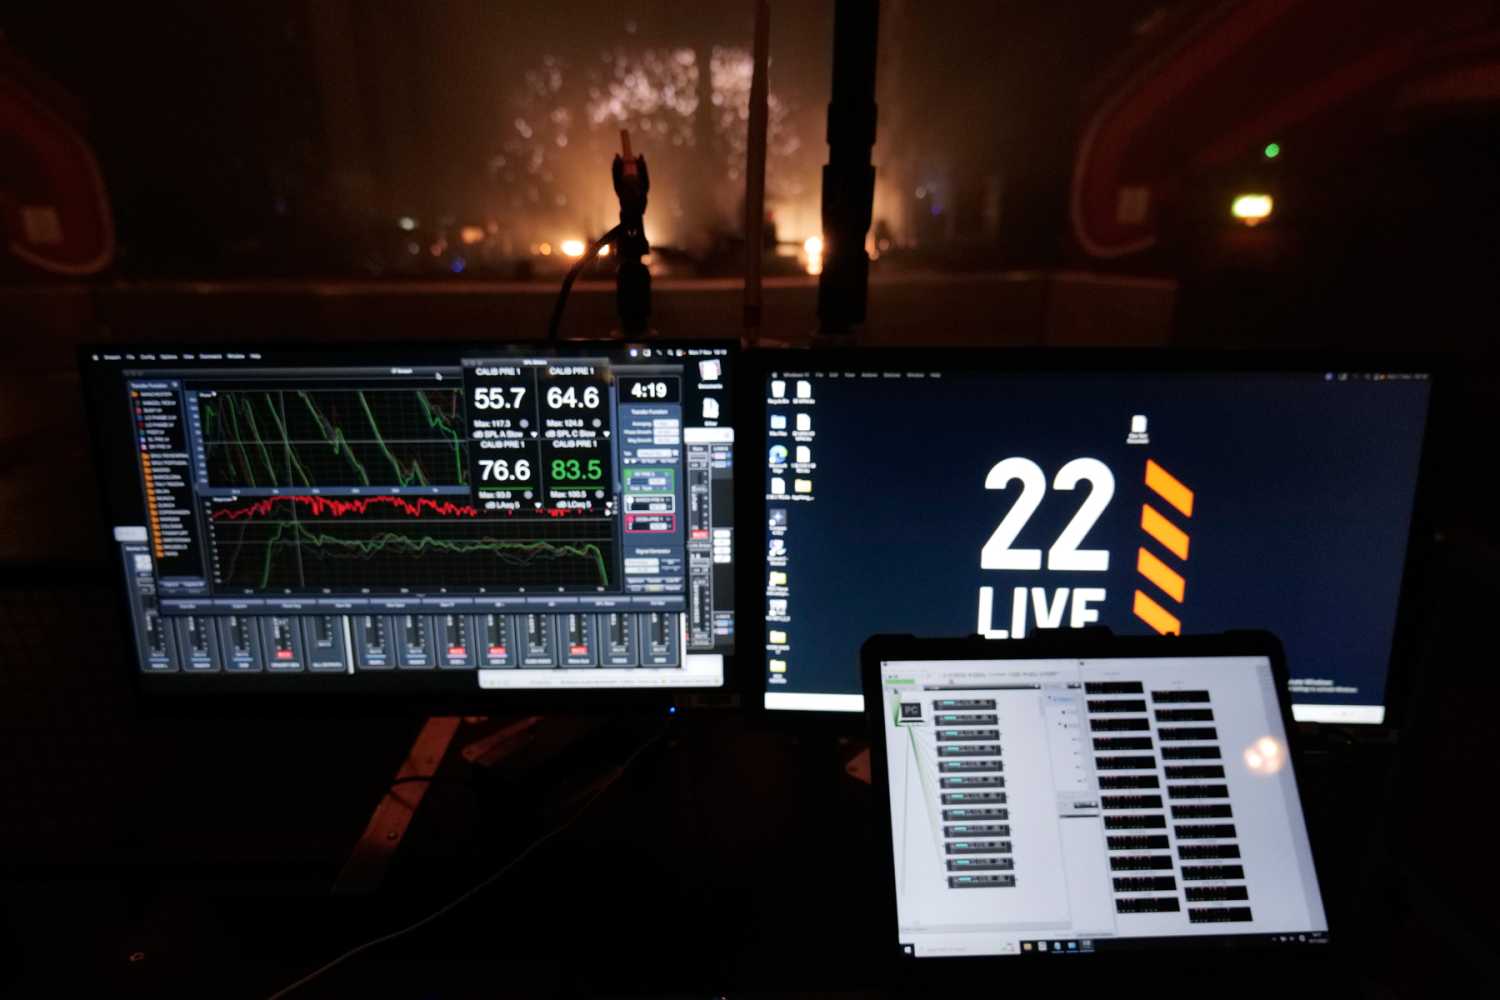 22live will support all Rational Acoustics products, with a particular focus on Smaart measurement and real-time analysis software